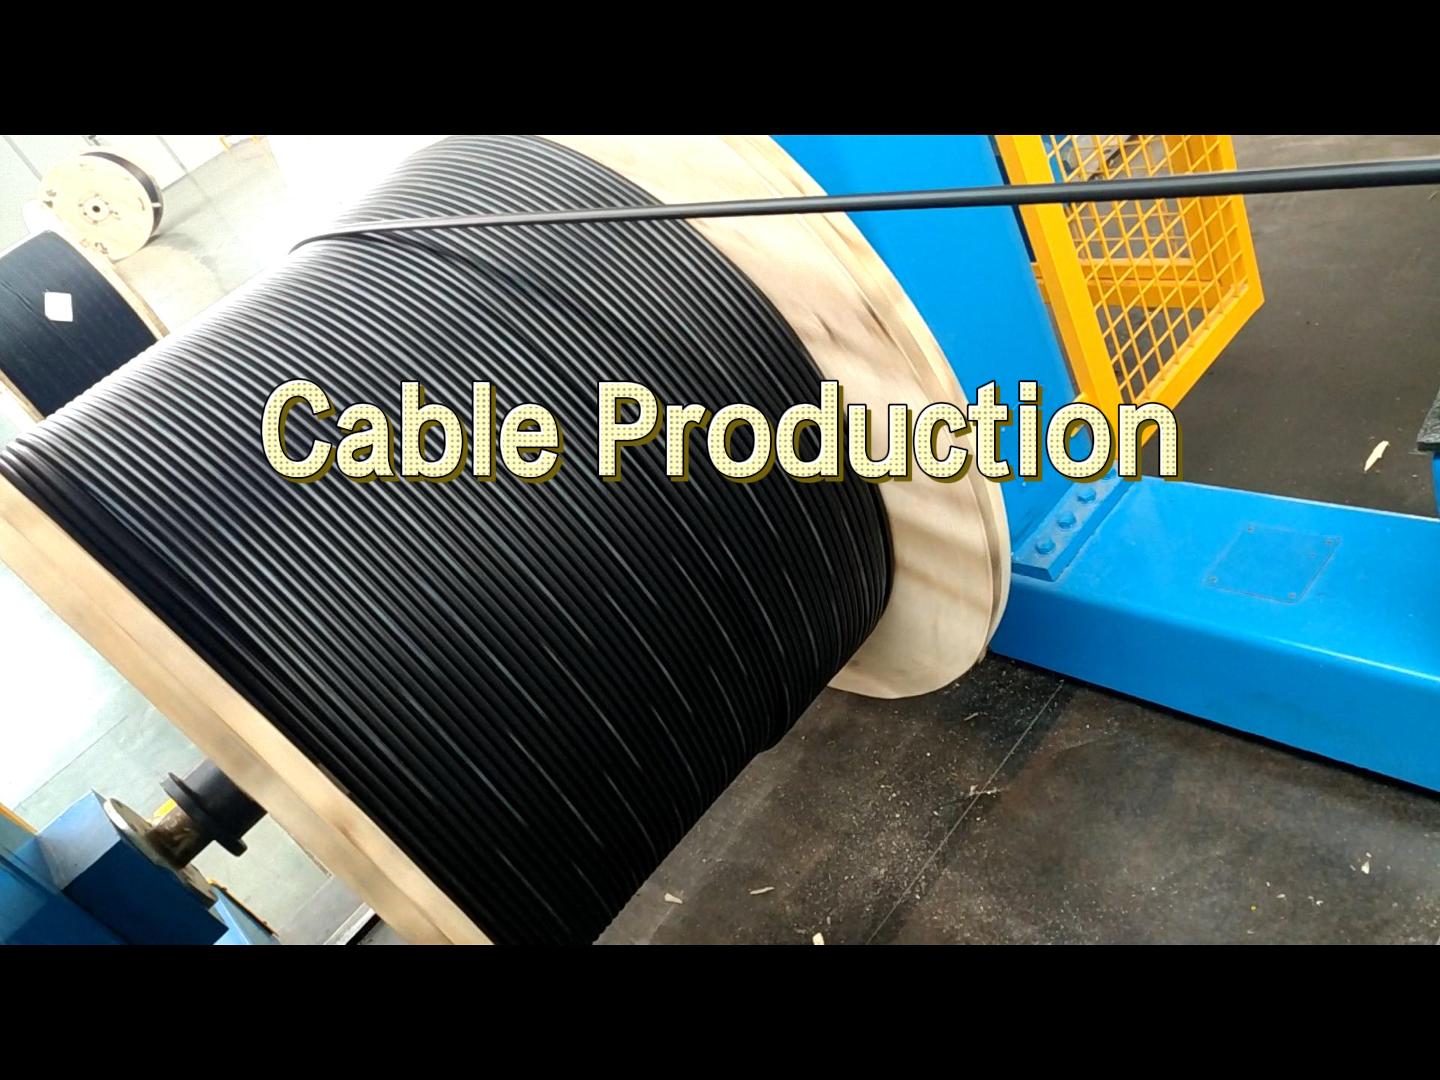 Optical Cable Production